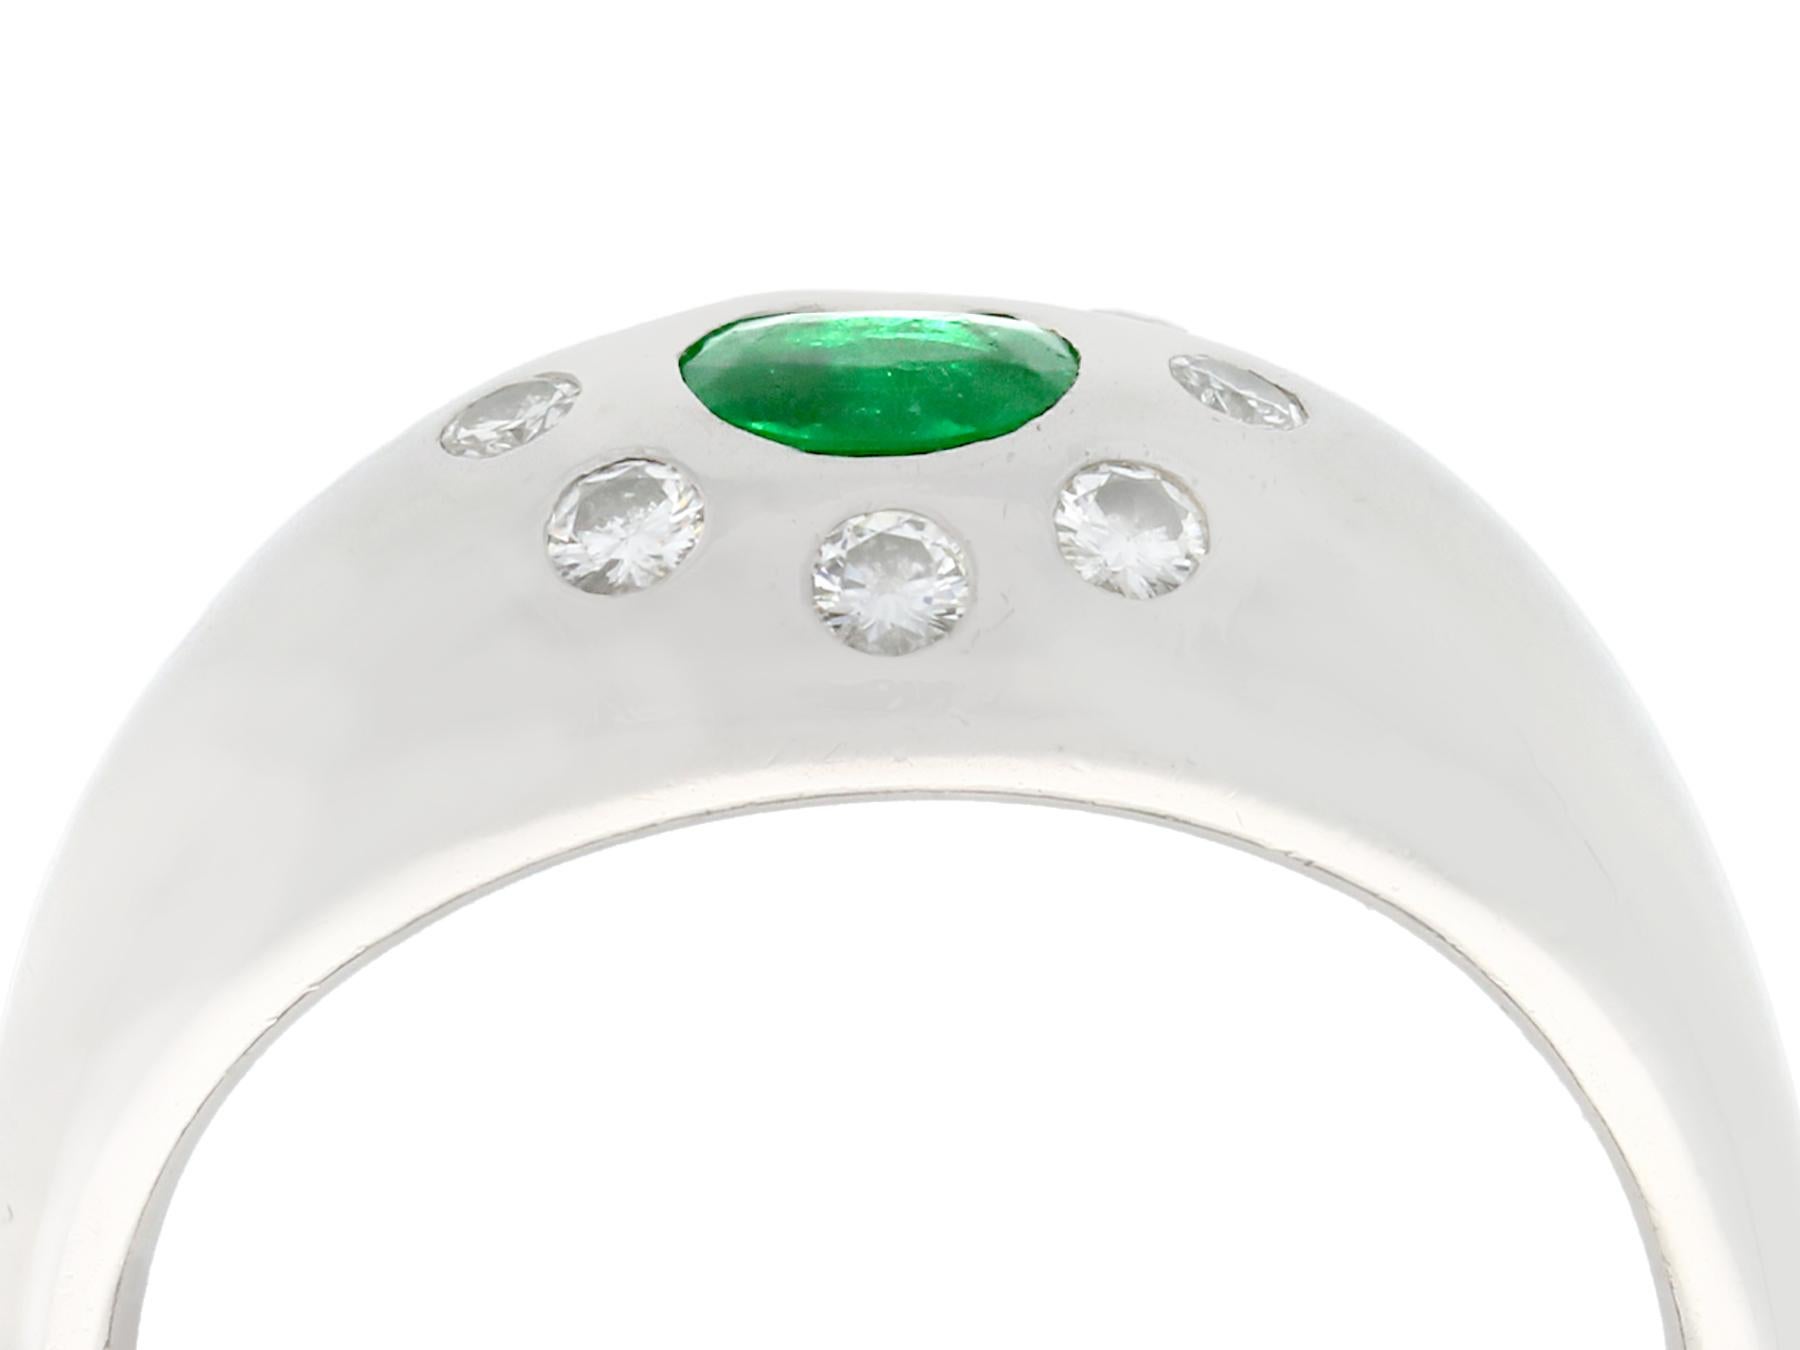 A fine and impressive 0.35 carat emerald and 0.18 carat diamond, platinum cocktail ring; part of our diverse antique jewelry and estate jewelry collections.

This fine and impressive diamond and emerald ring has been crafted in platinum.

The domed